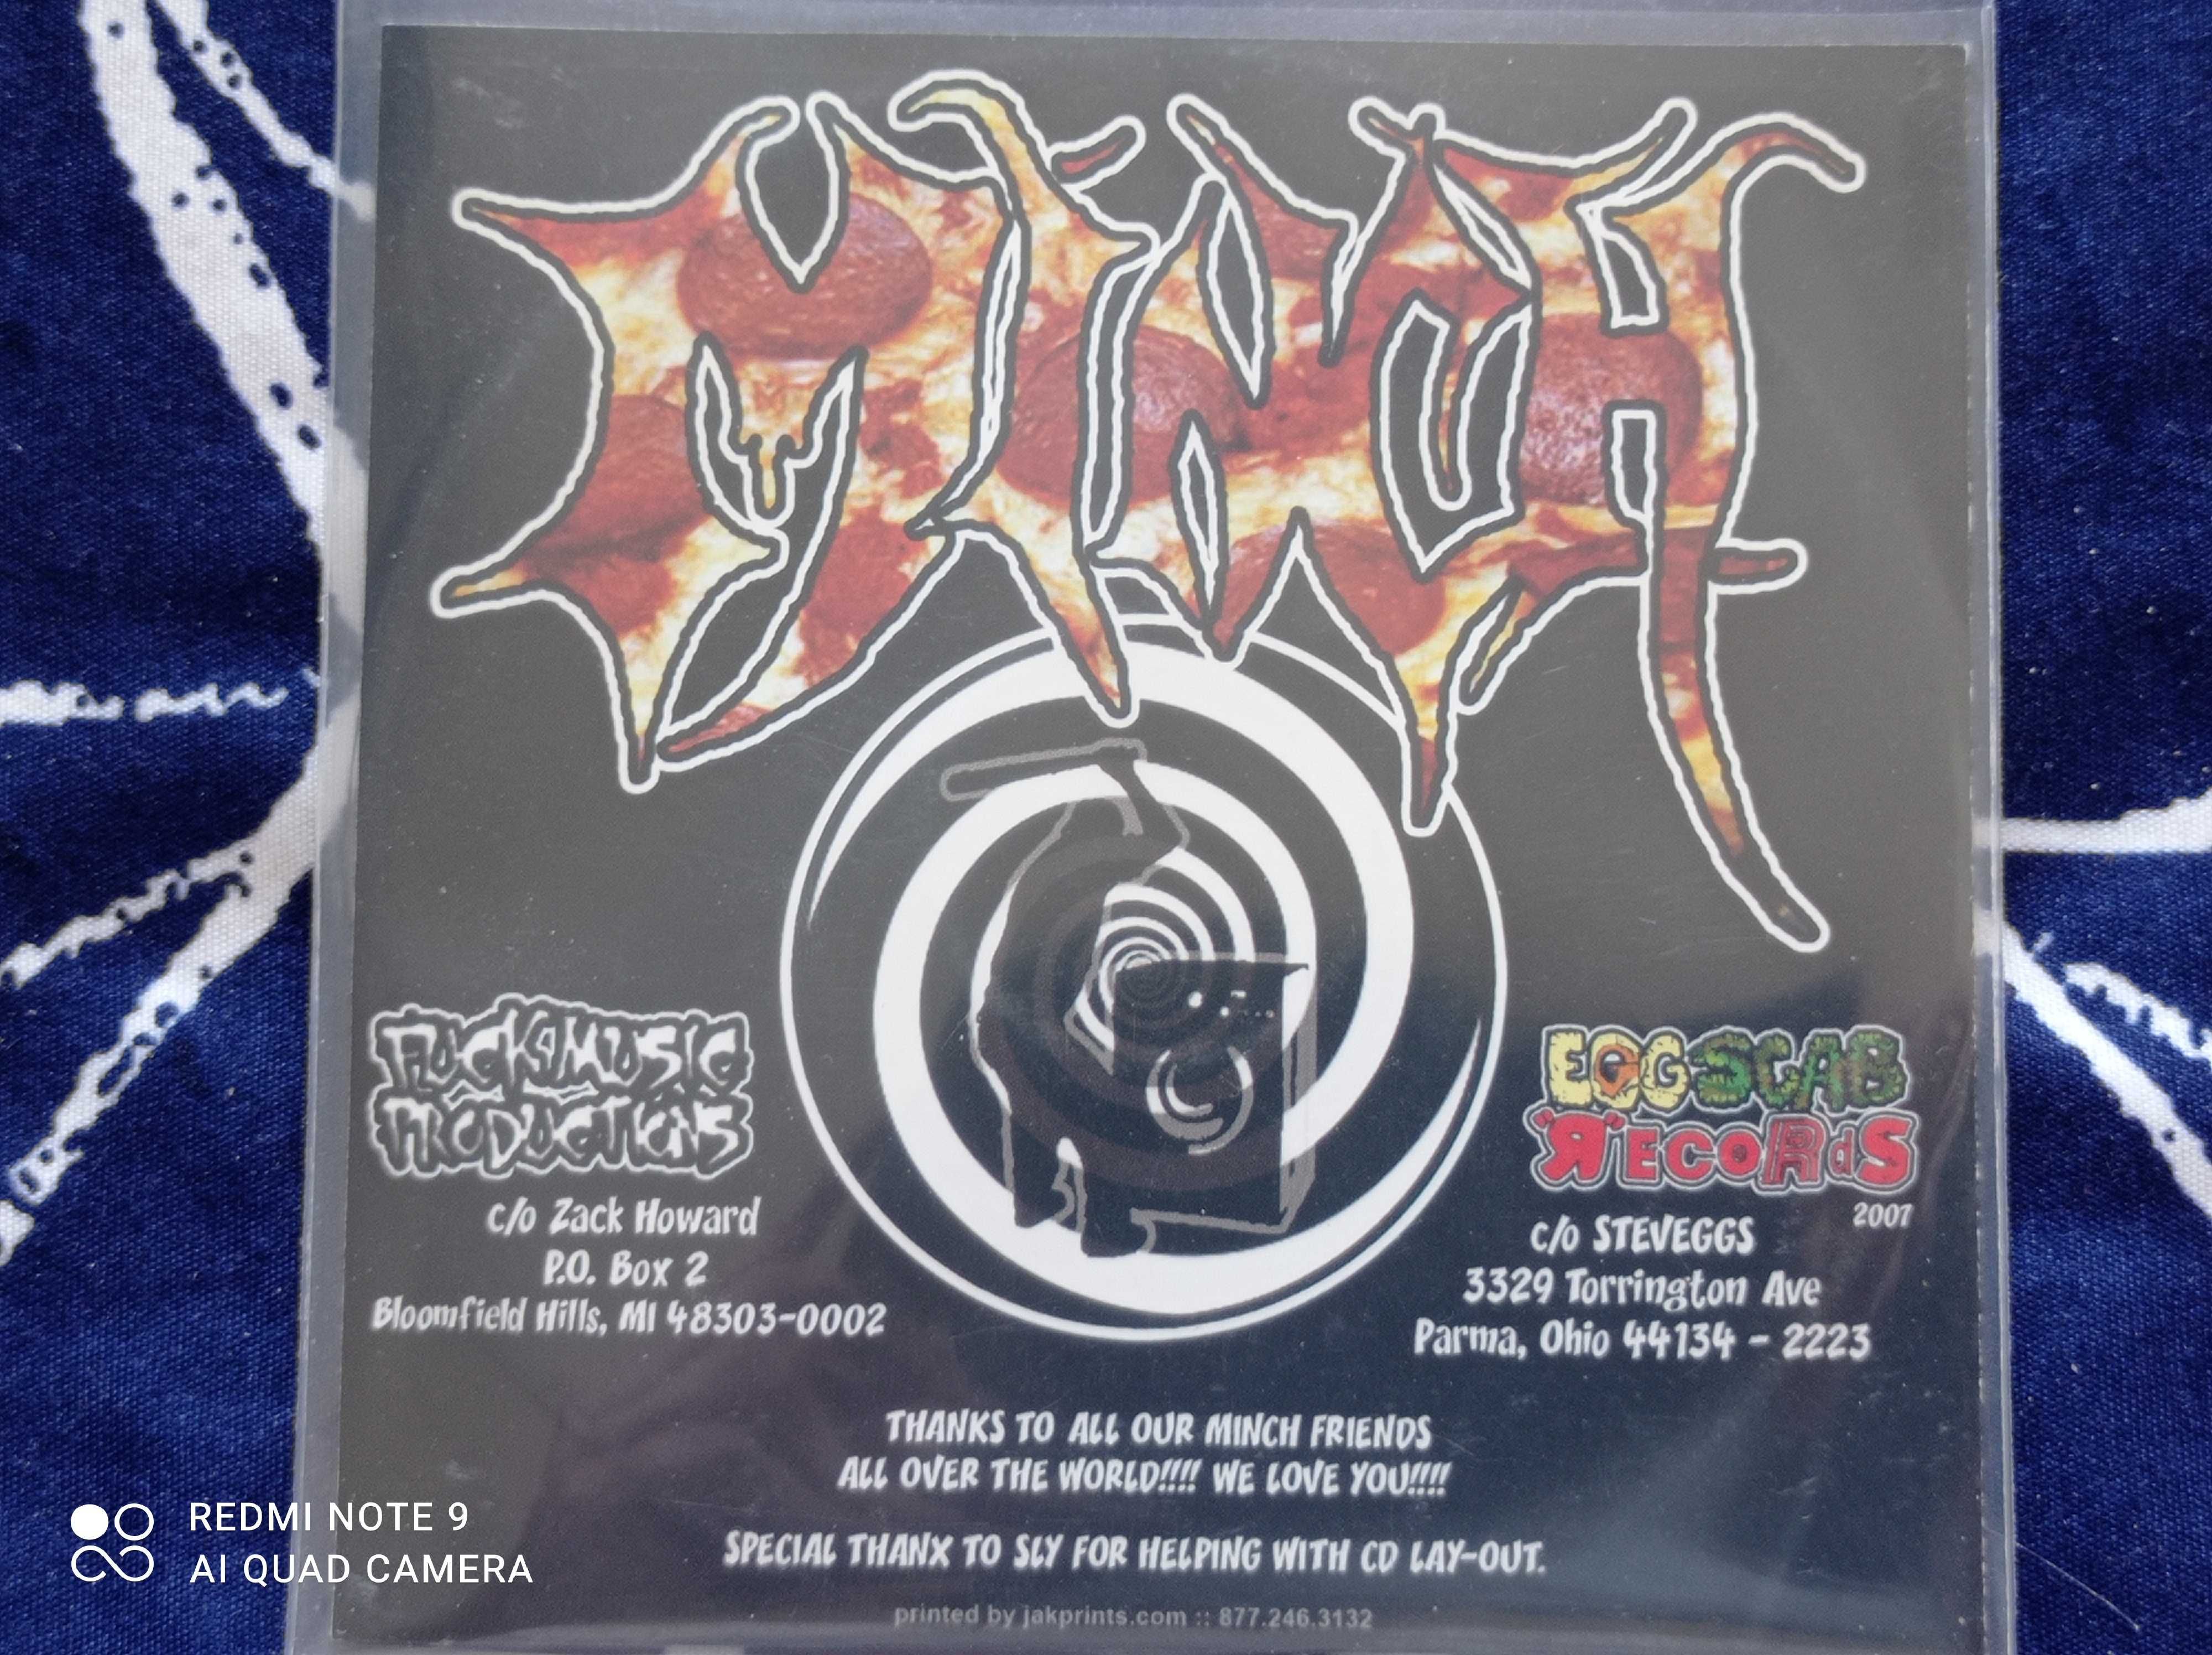 Minch - 7" Collection CD noise core Anal Cunt Meat Shits 7 MON